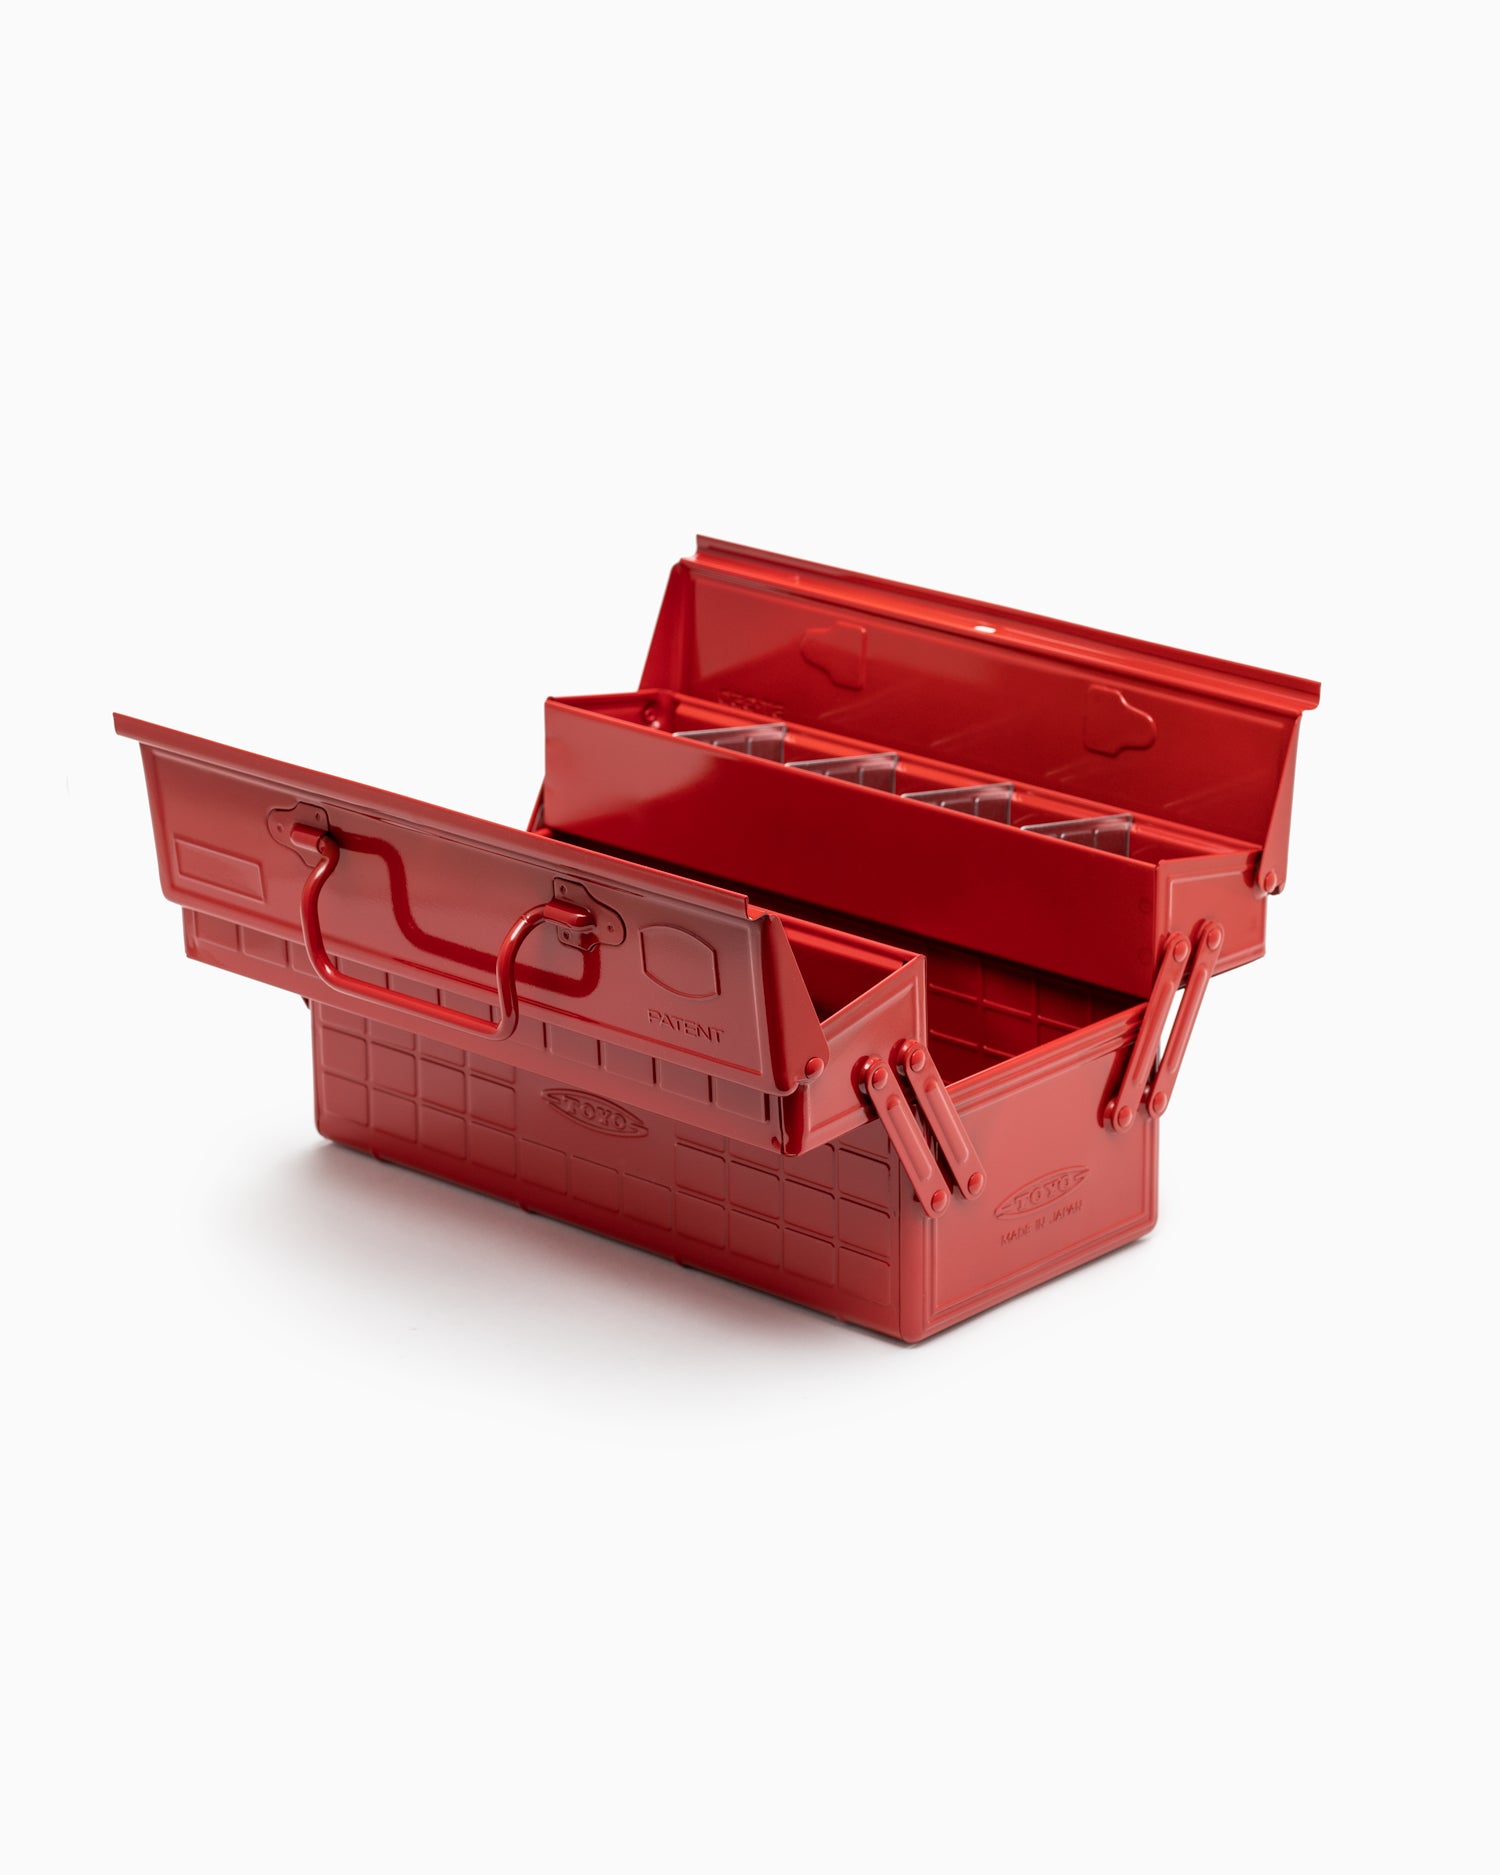 Two Stage ST-350 Toolbox - Red